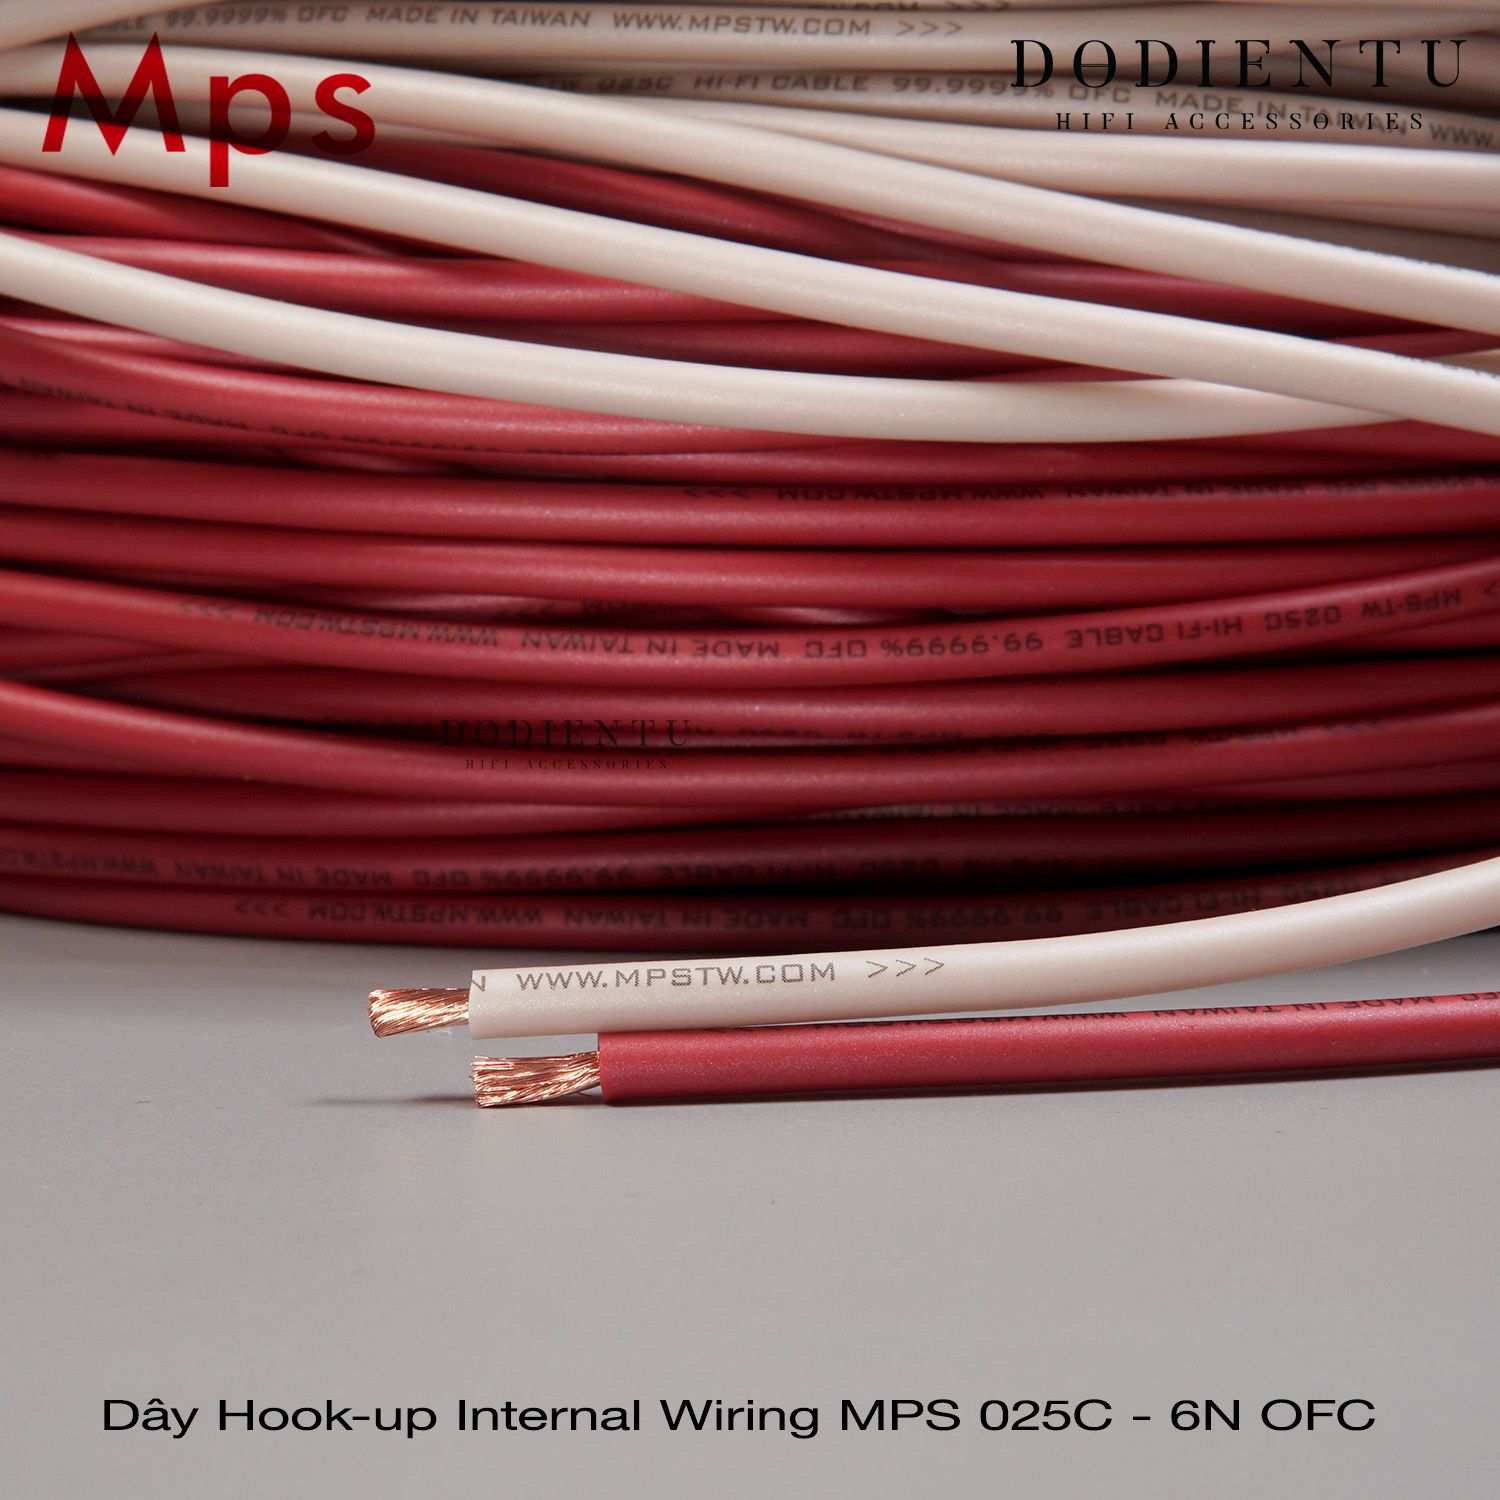 MPS 025C - 6N OFC ( 13 AWG )